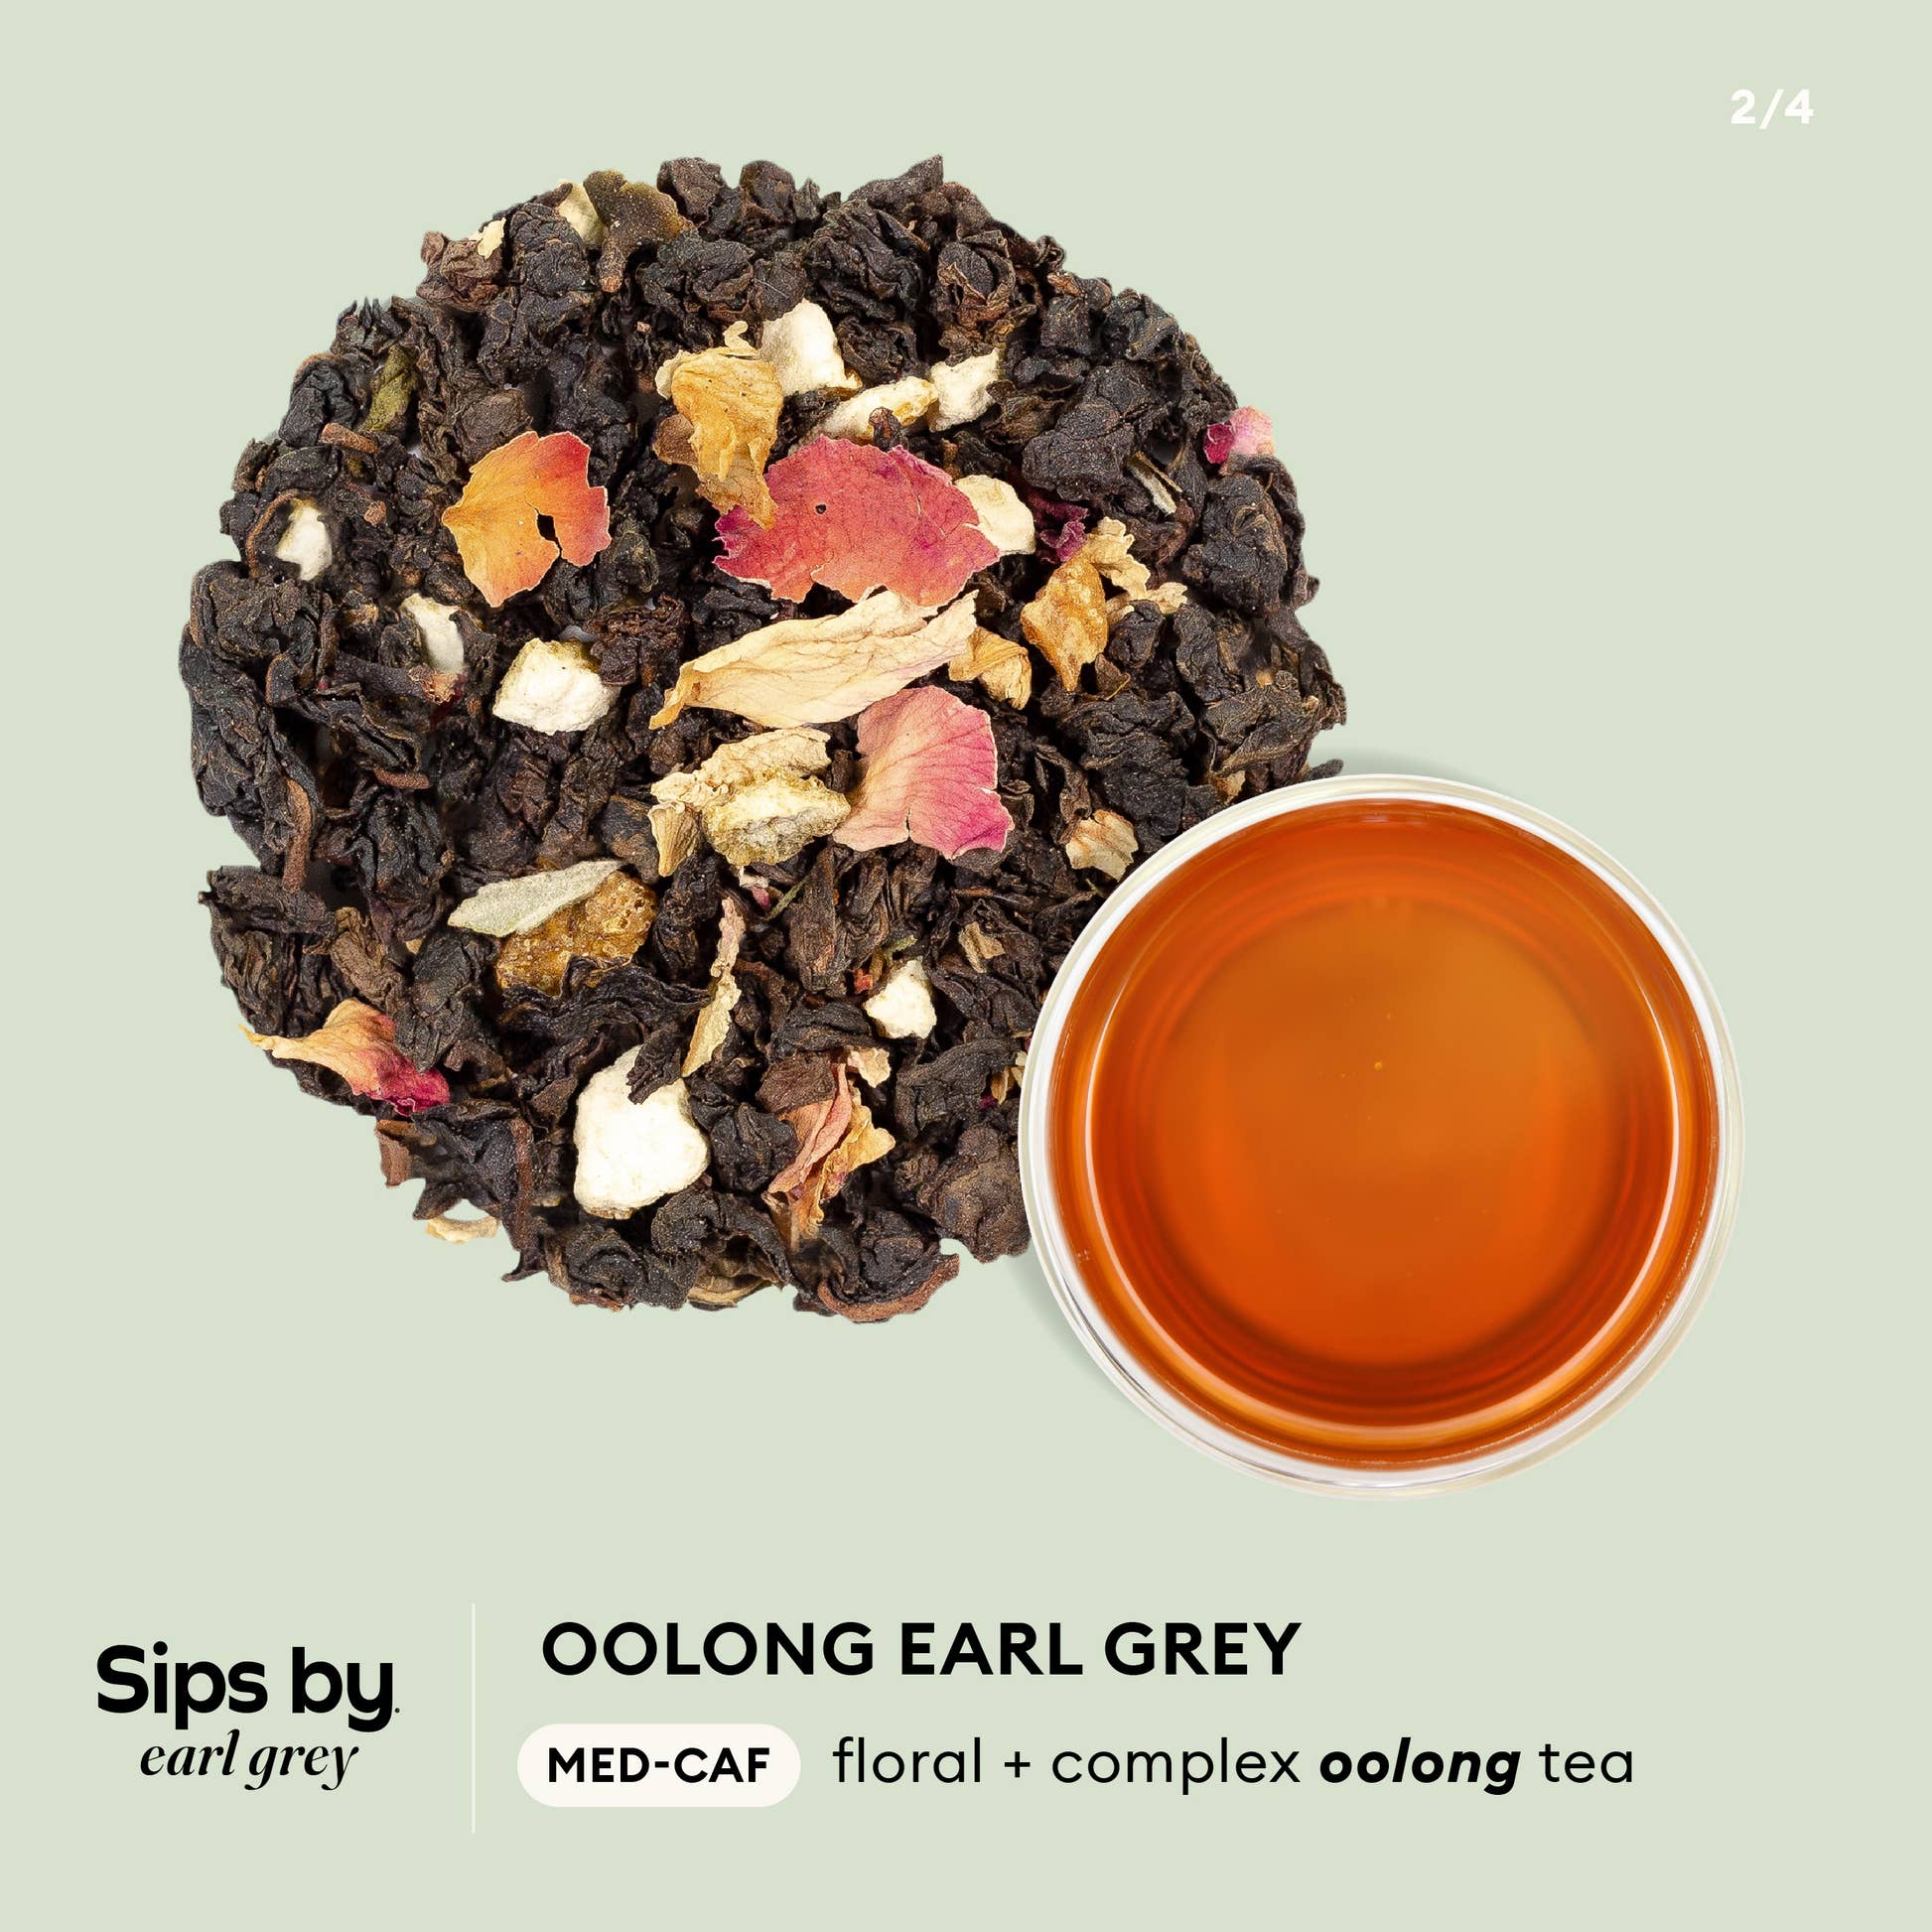 Sips by Earl Grey - Oolong Earl Grey med-caf, floral + complex infographic